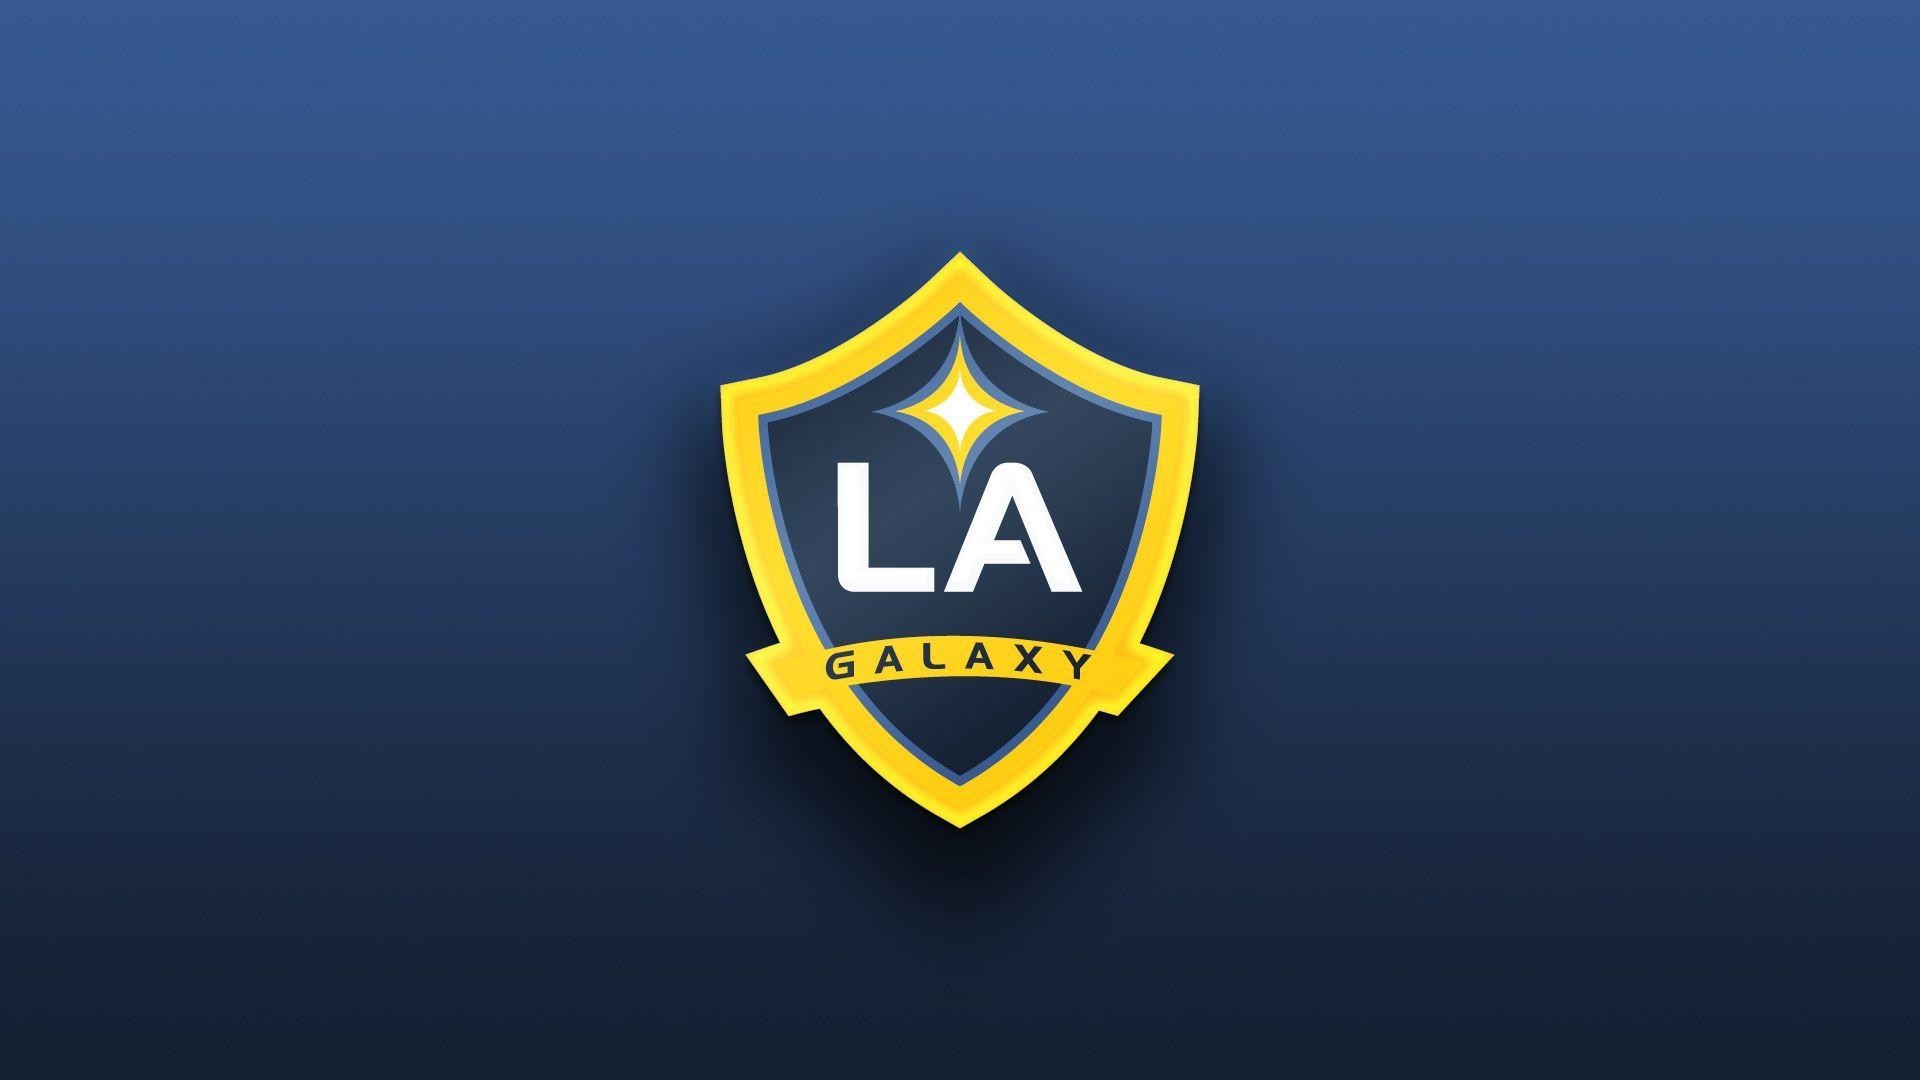 LA Galaxy For Desktop Wallpaper With high-resolution 1920X1080 pixel. You can use this wallpaper for your Desktop Computers, Mac Screensavers, Windows Backgrounds, iPhone Wallpapers, Tablet or Android Lock screen and another Mobile device